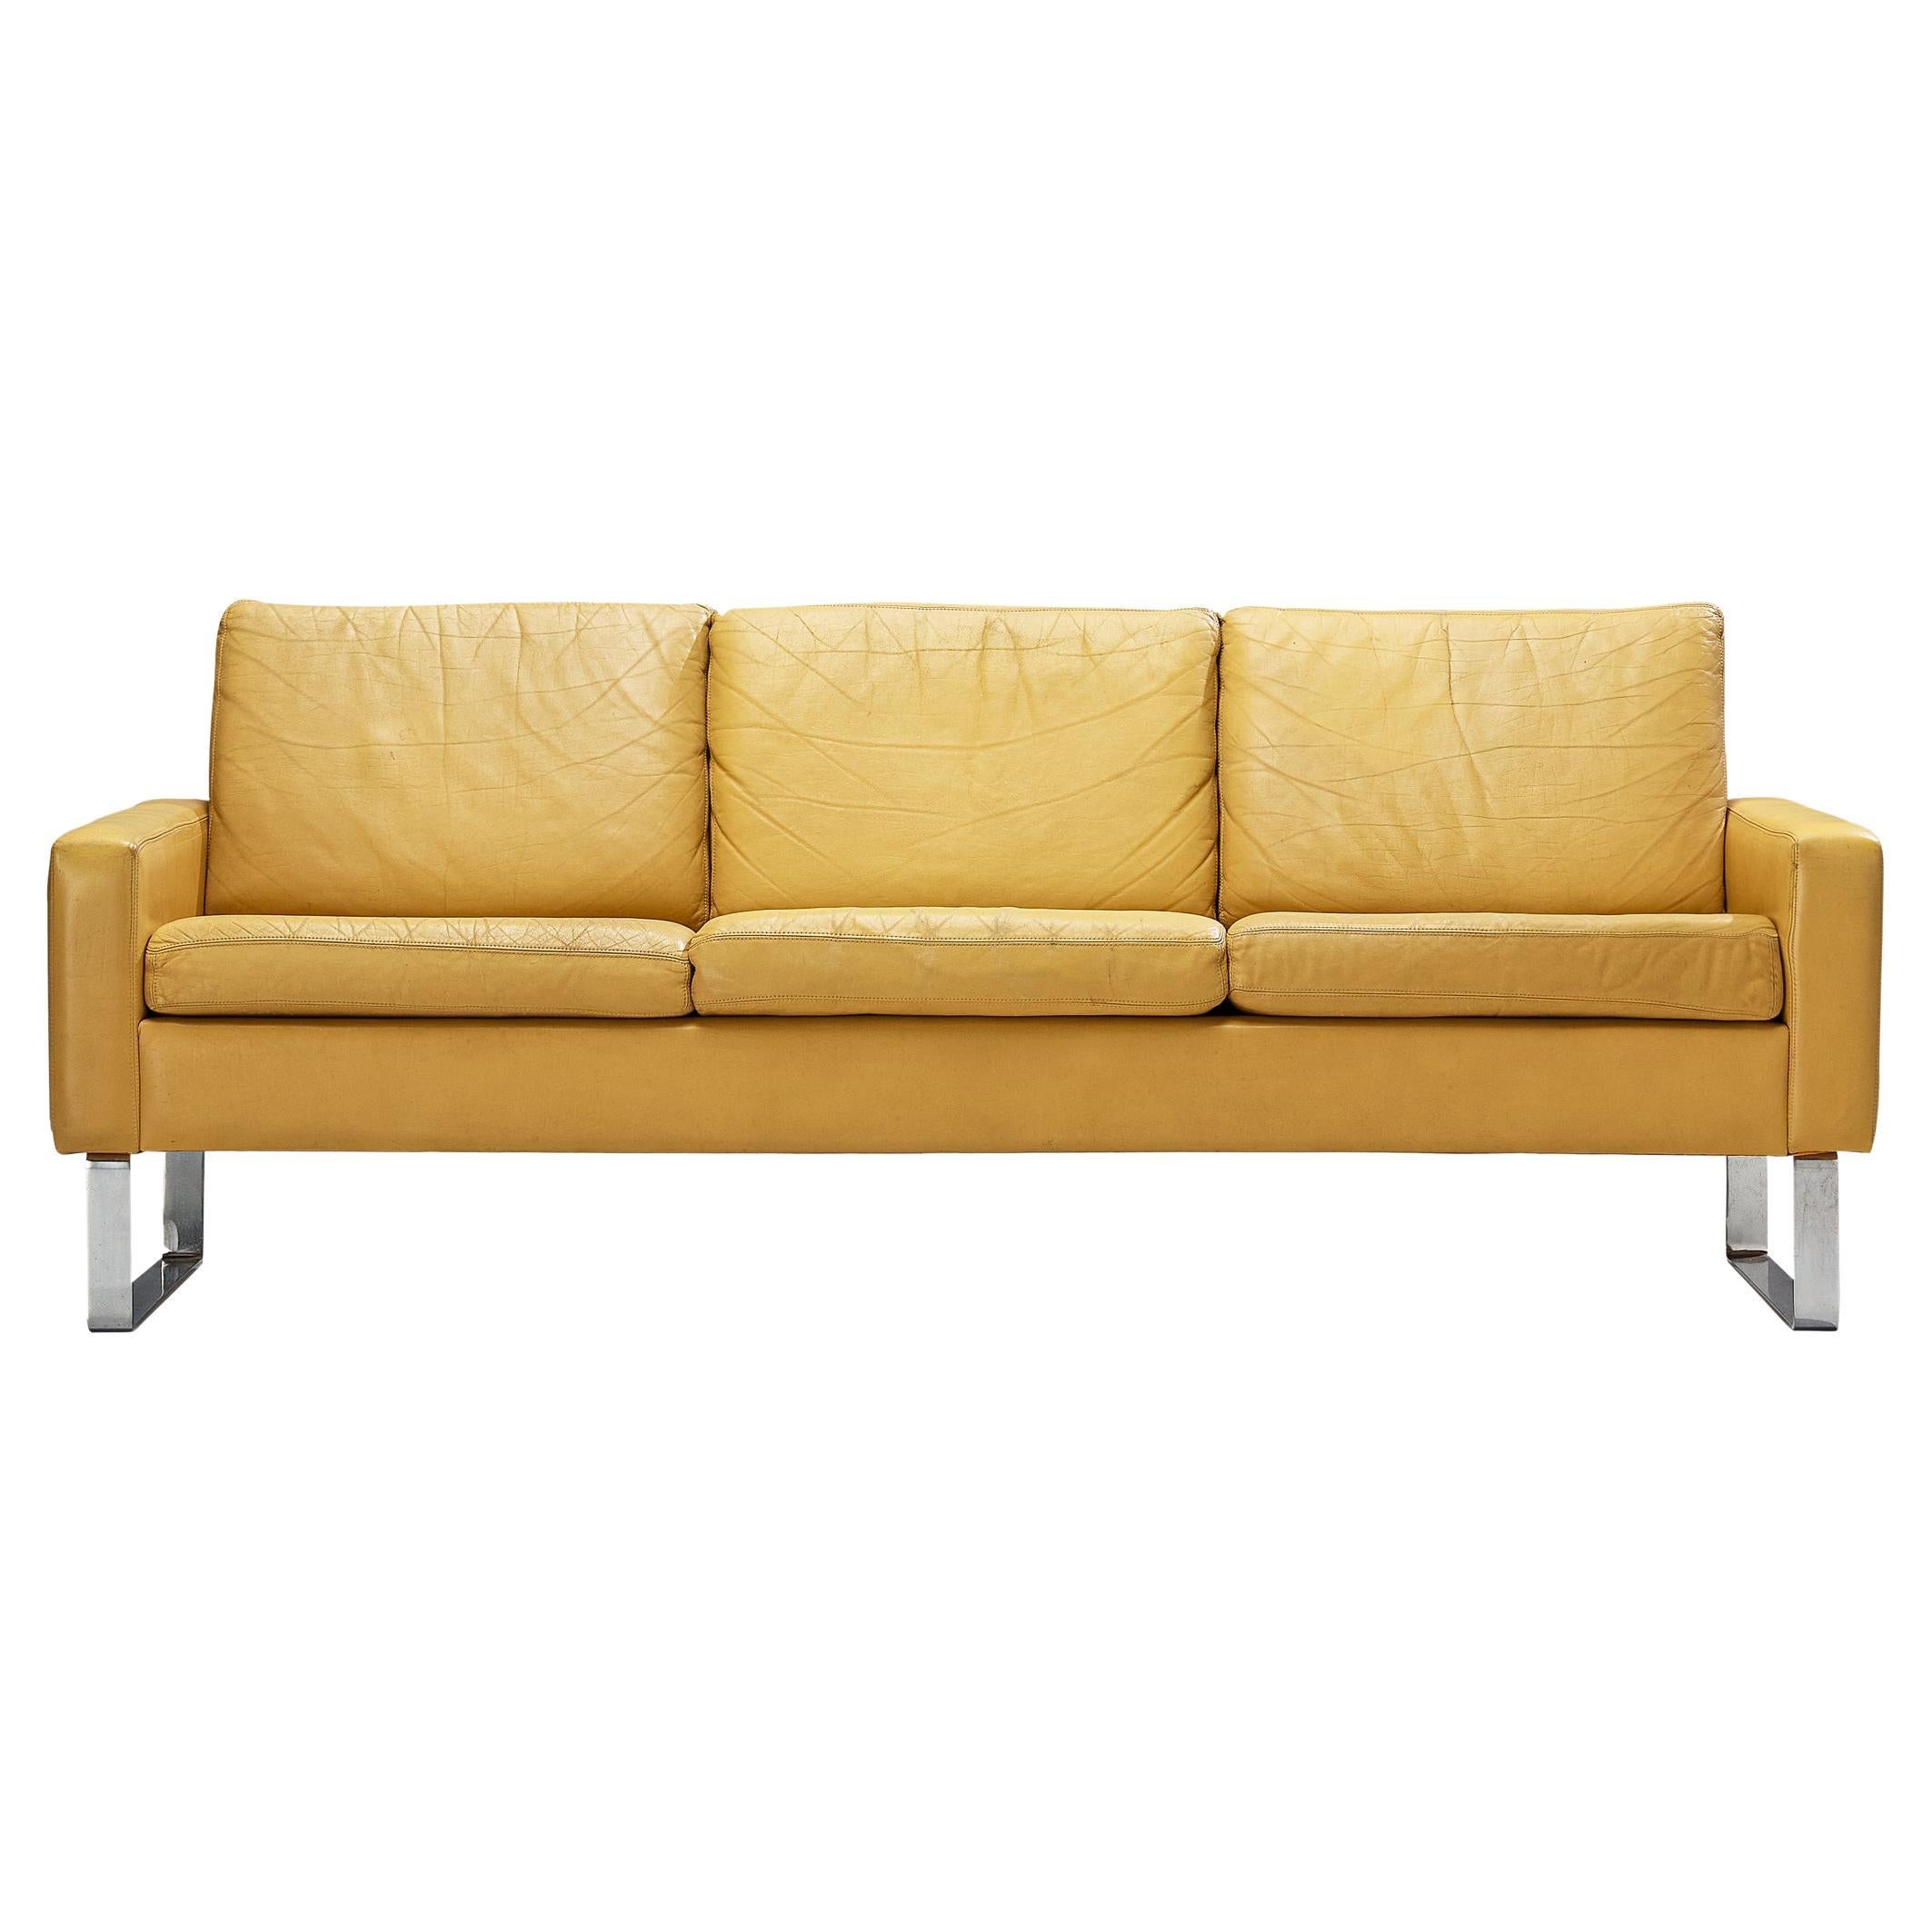 Mid-Century Modern Sofa in Camel Yellow Leather and Steel